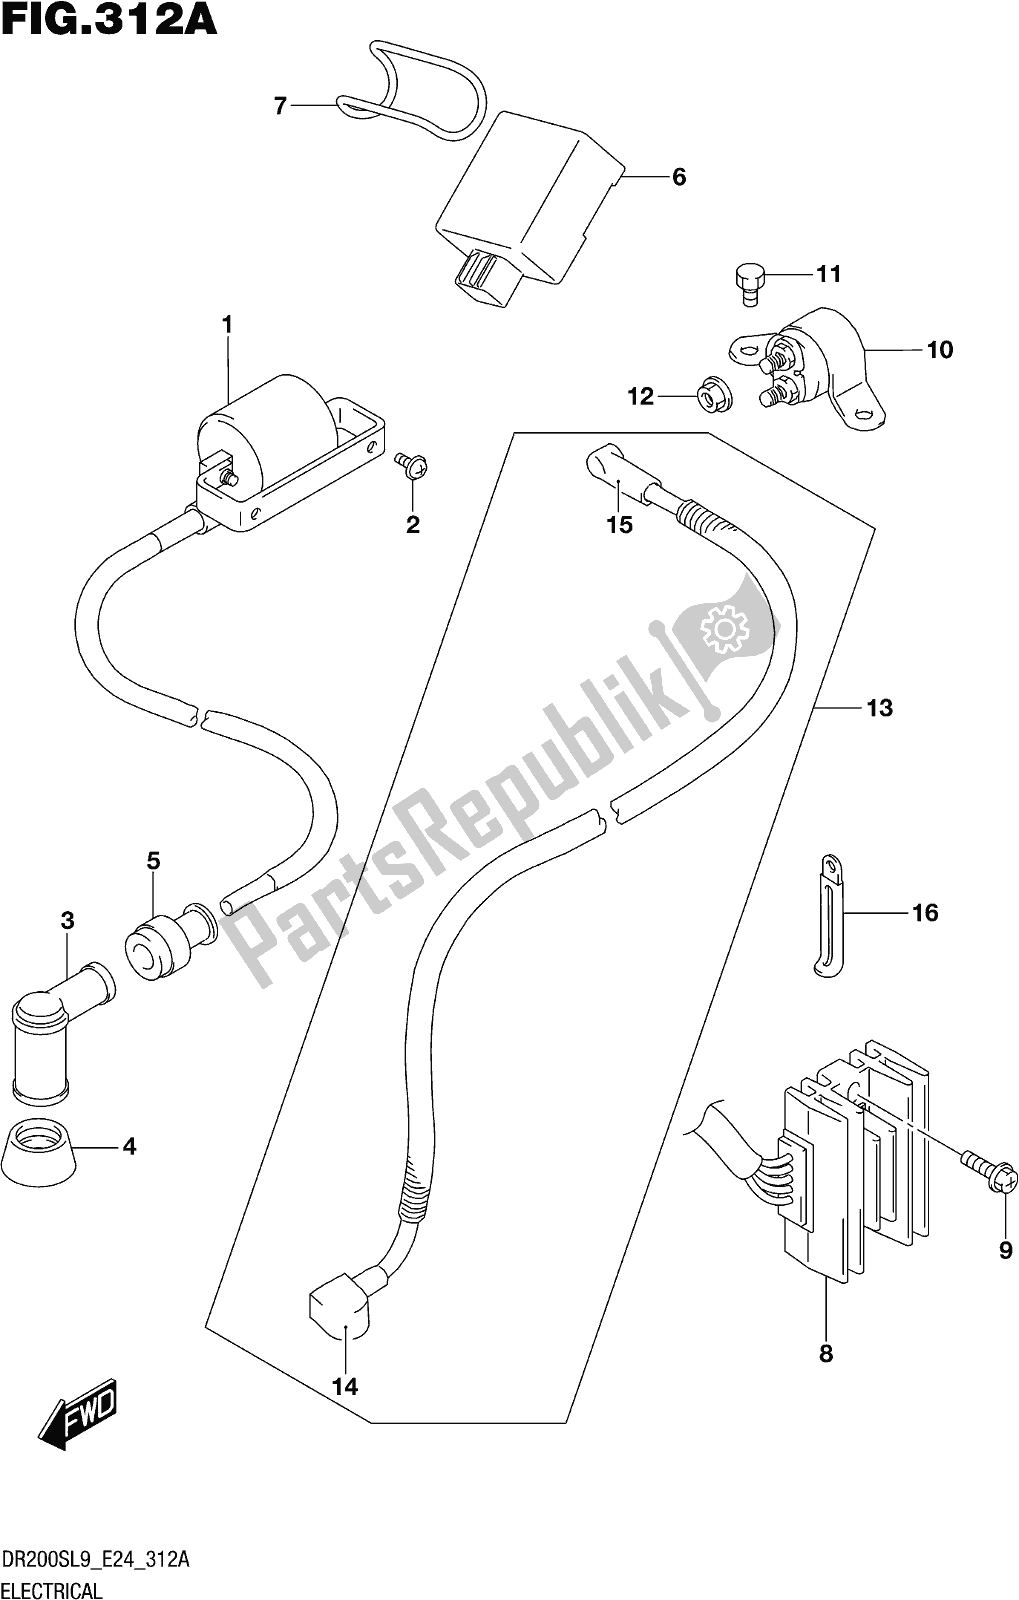 All parts for the Fig. 312a Electrical of the Suzuki DR 200S 2019